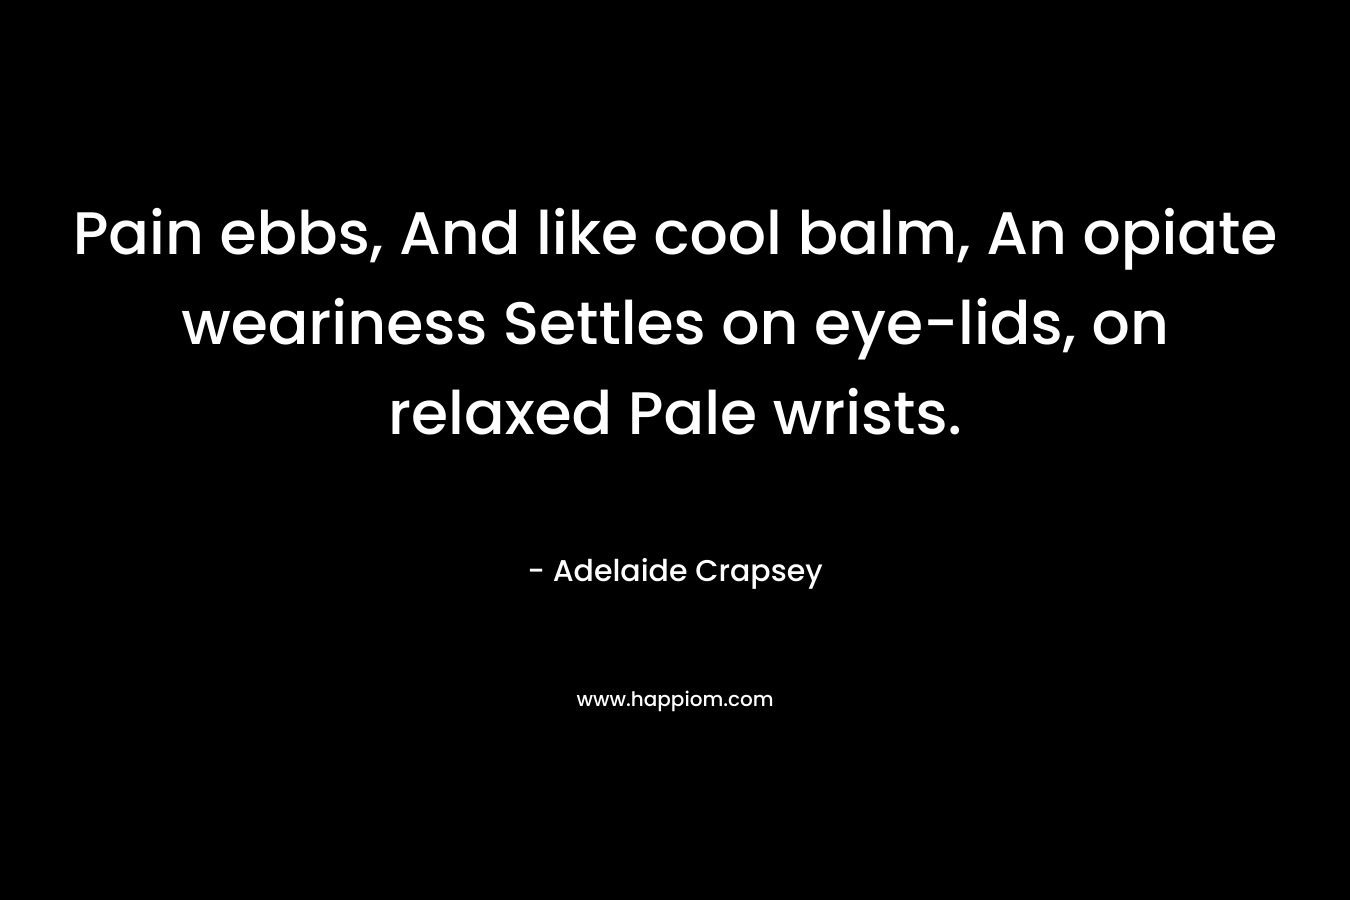 Pain ebbs, And like cool balm, An opiate weariness Settles on eye-lids, on relaxed Pale wrists. – Adelaide Crapsey